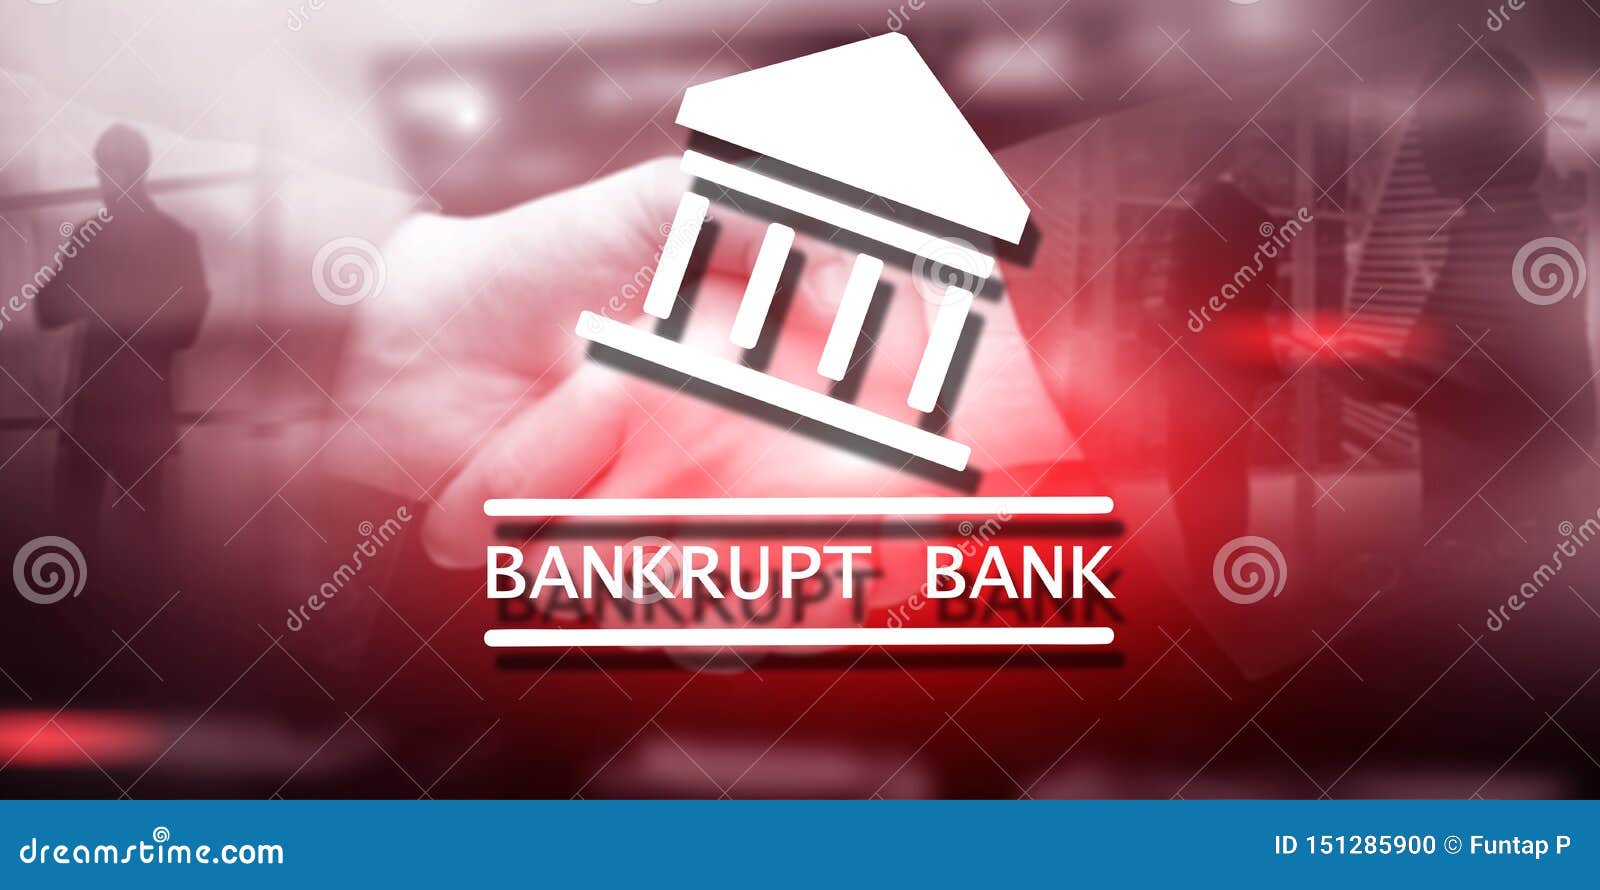 The Bank is Bankrupt. the Inscription on the Virtual Screen Bankrupt